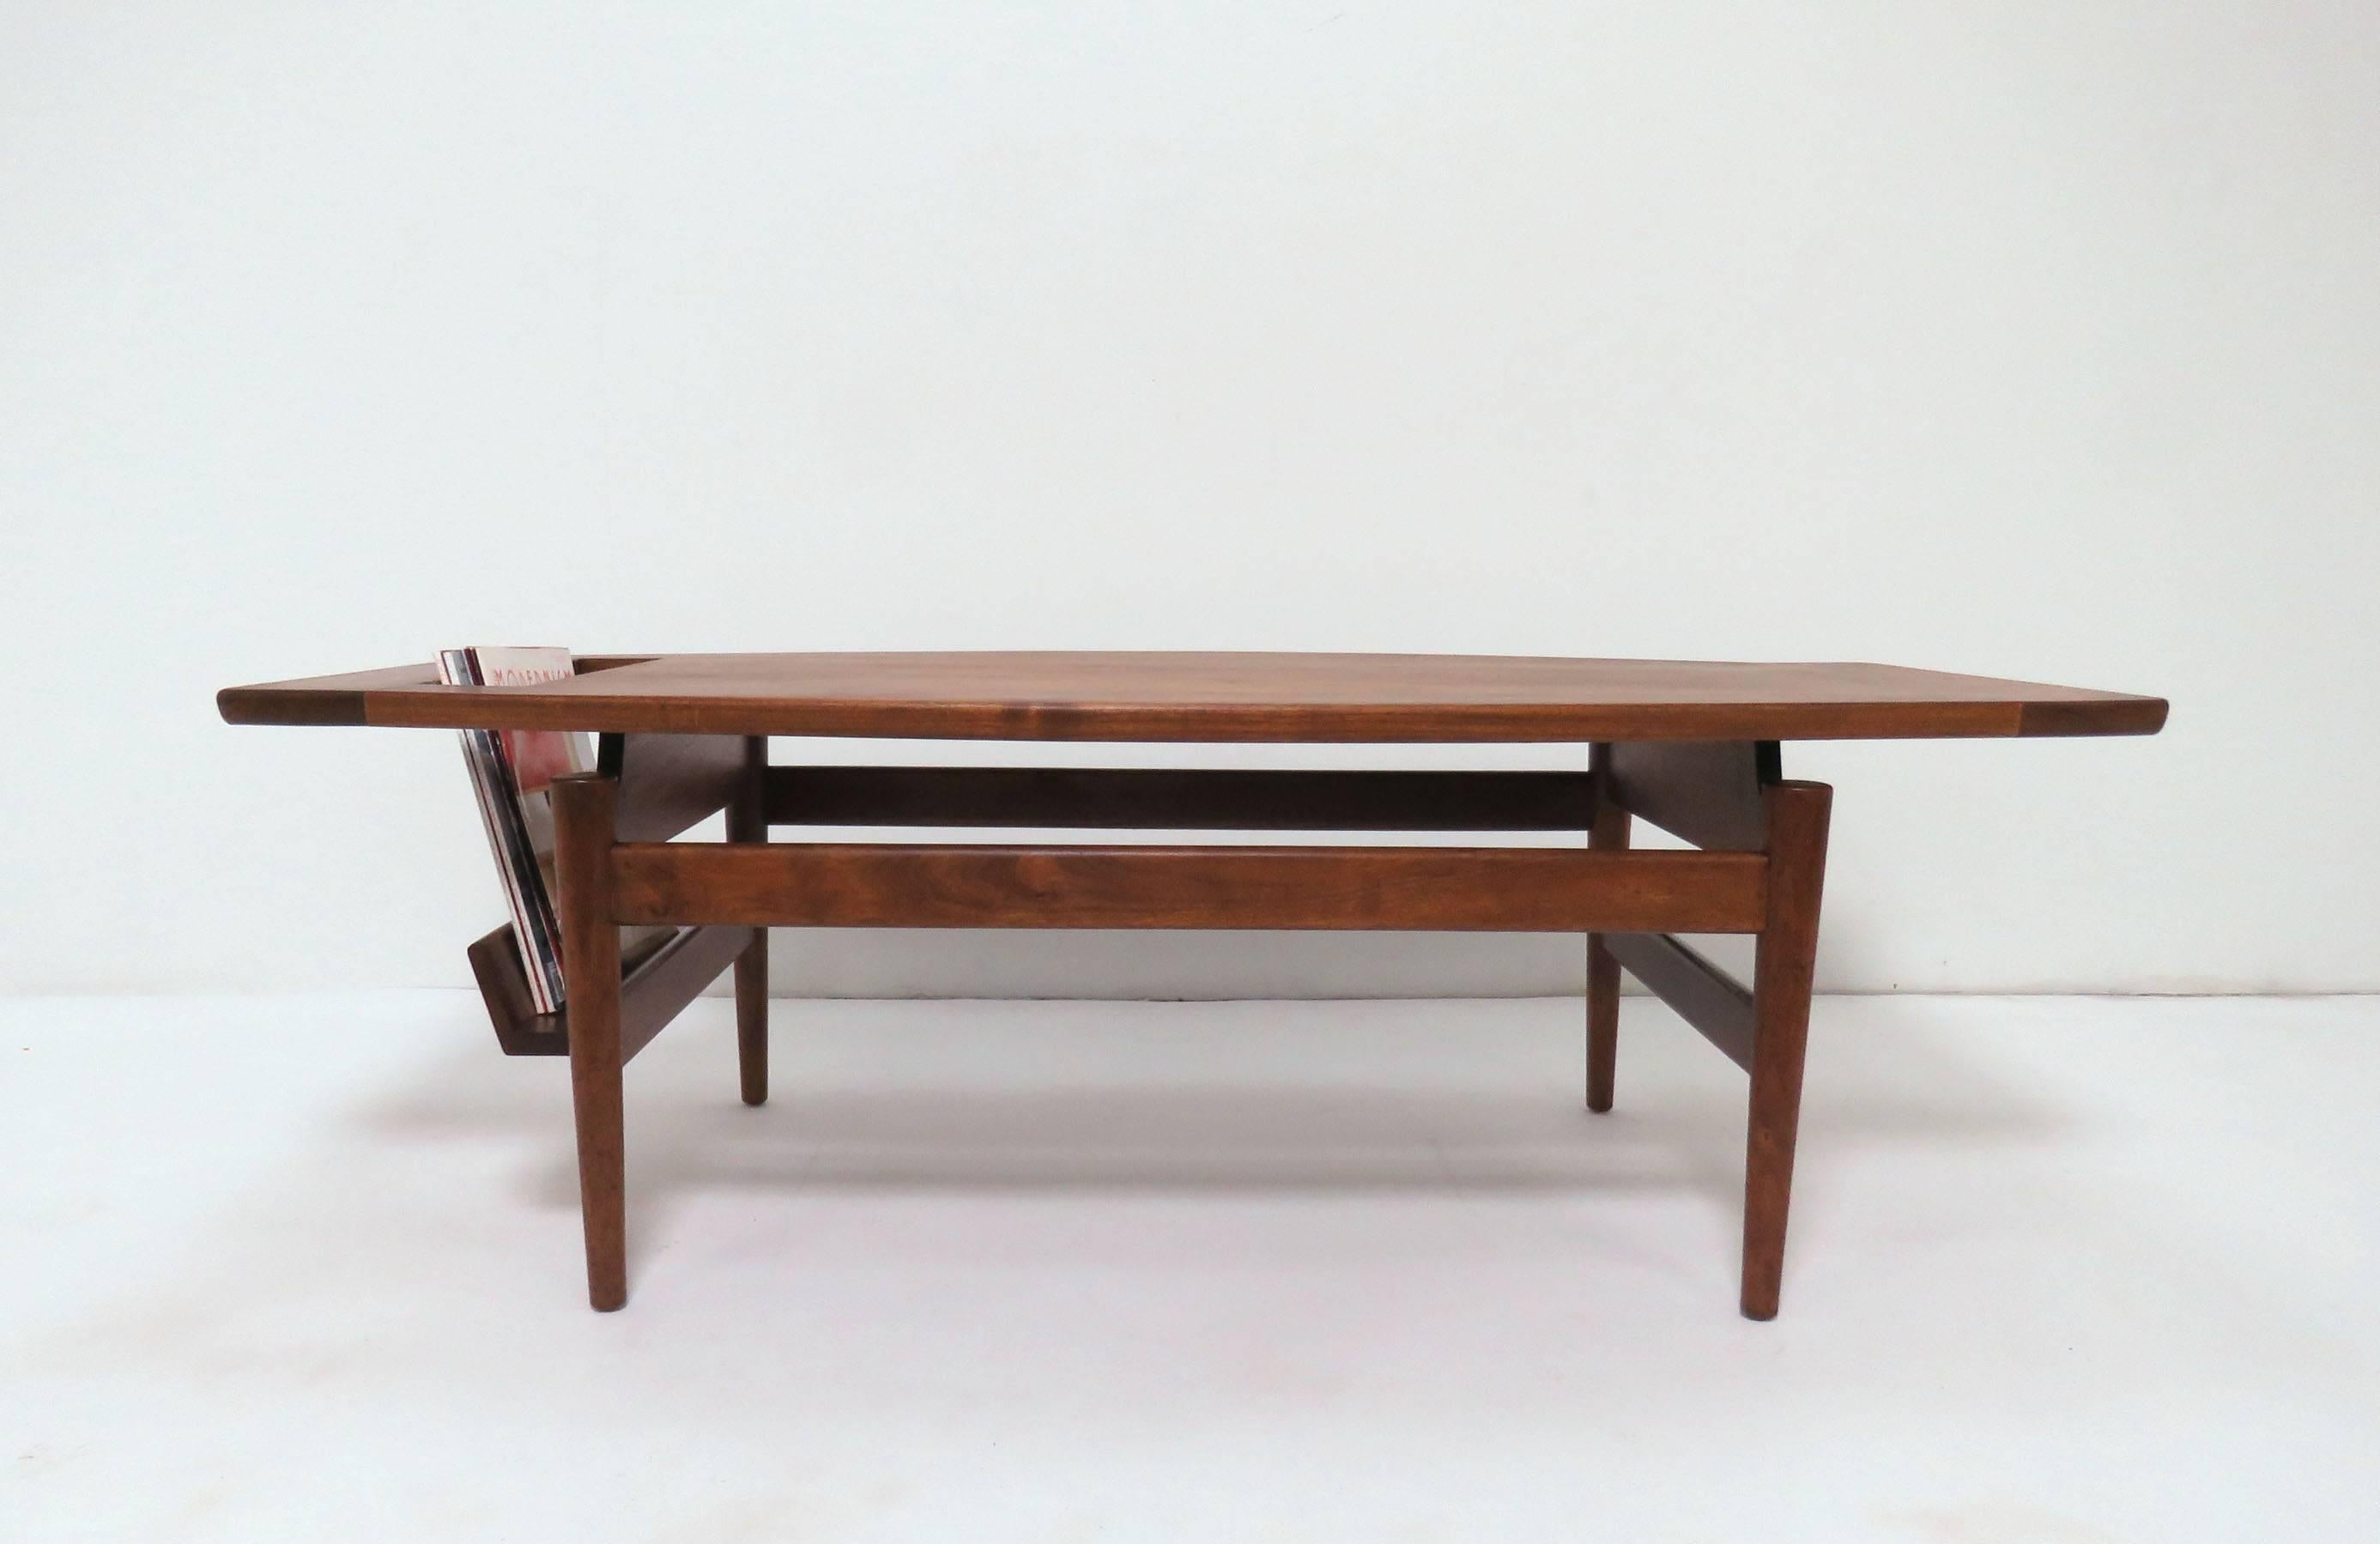 Coffee table in solid walnut by Jens Risom, model T390, with built-in magazine holder, circa 1950s.